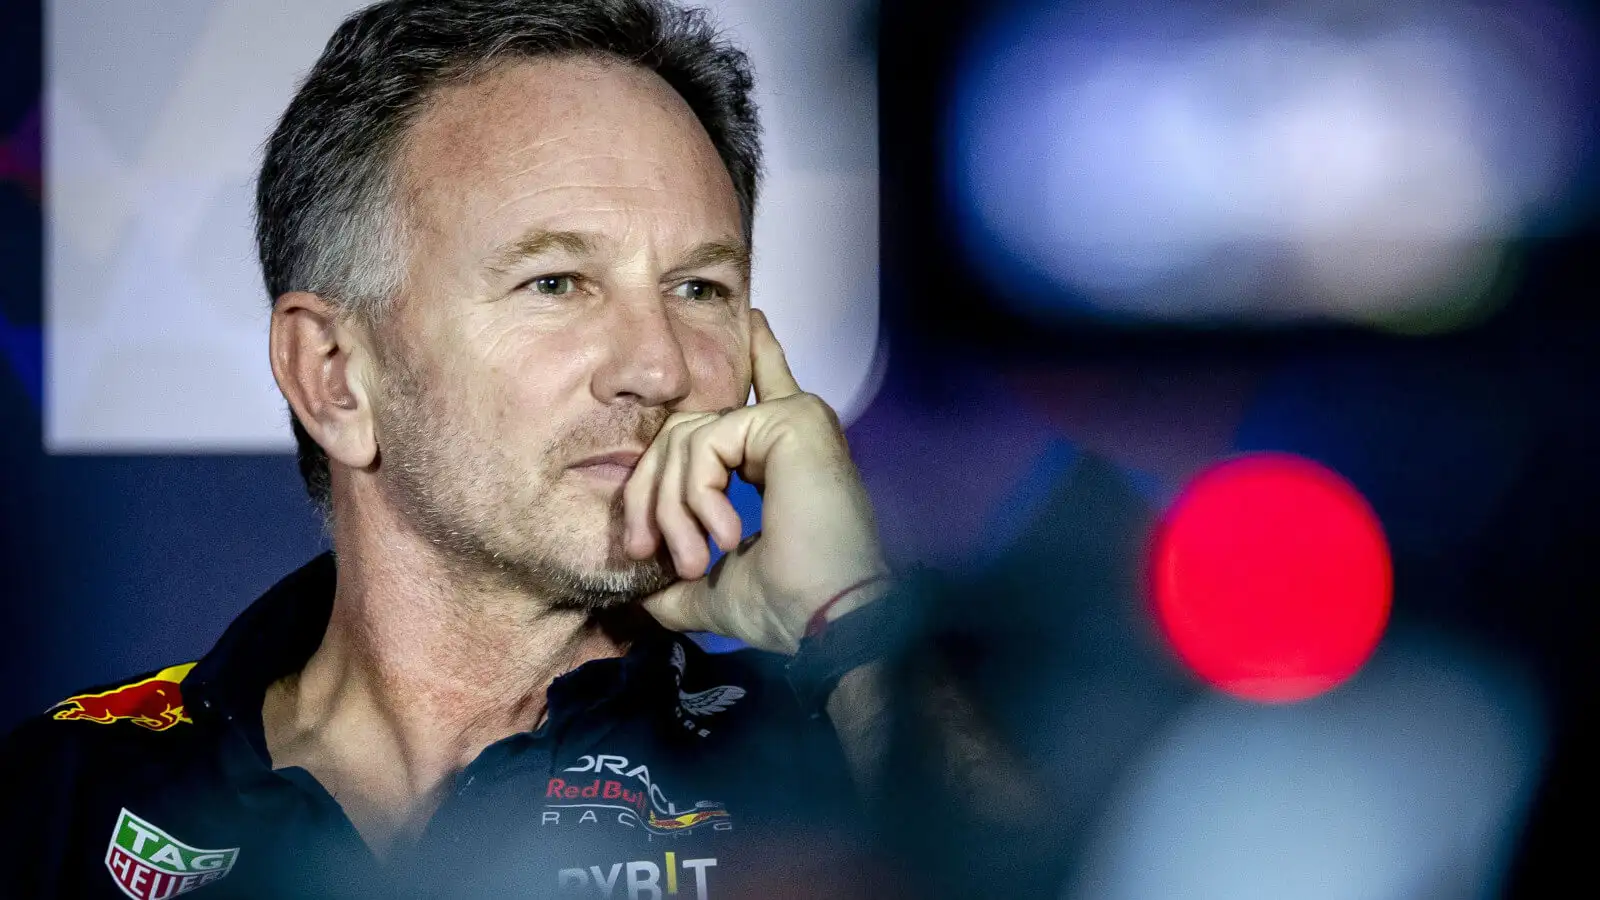 Horner Urges Wolff to Address Internal F1 Issues, Not Verstappen's Availability